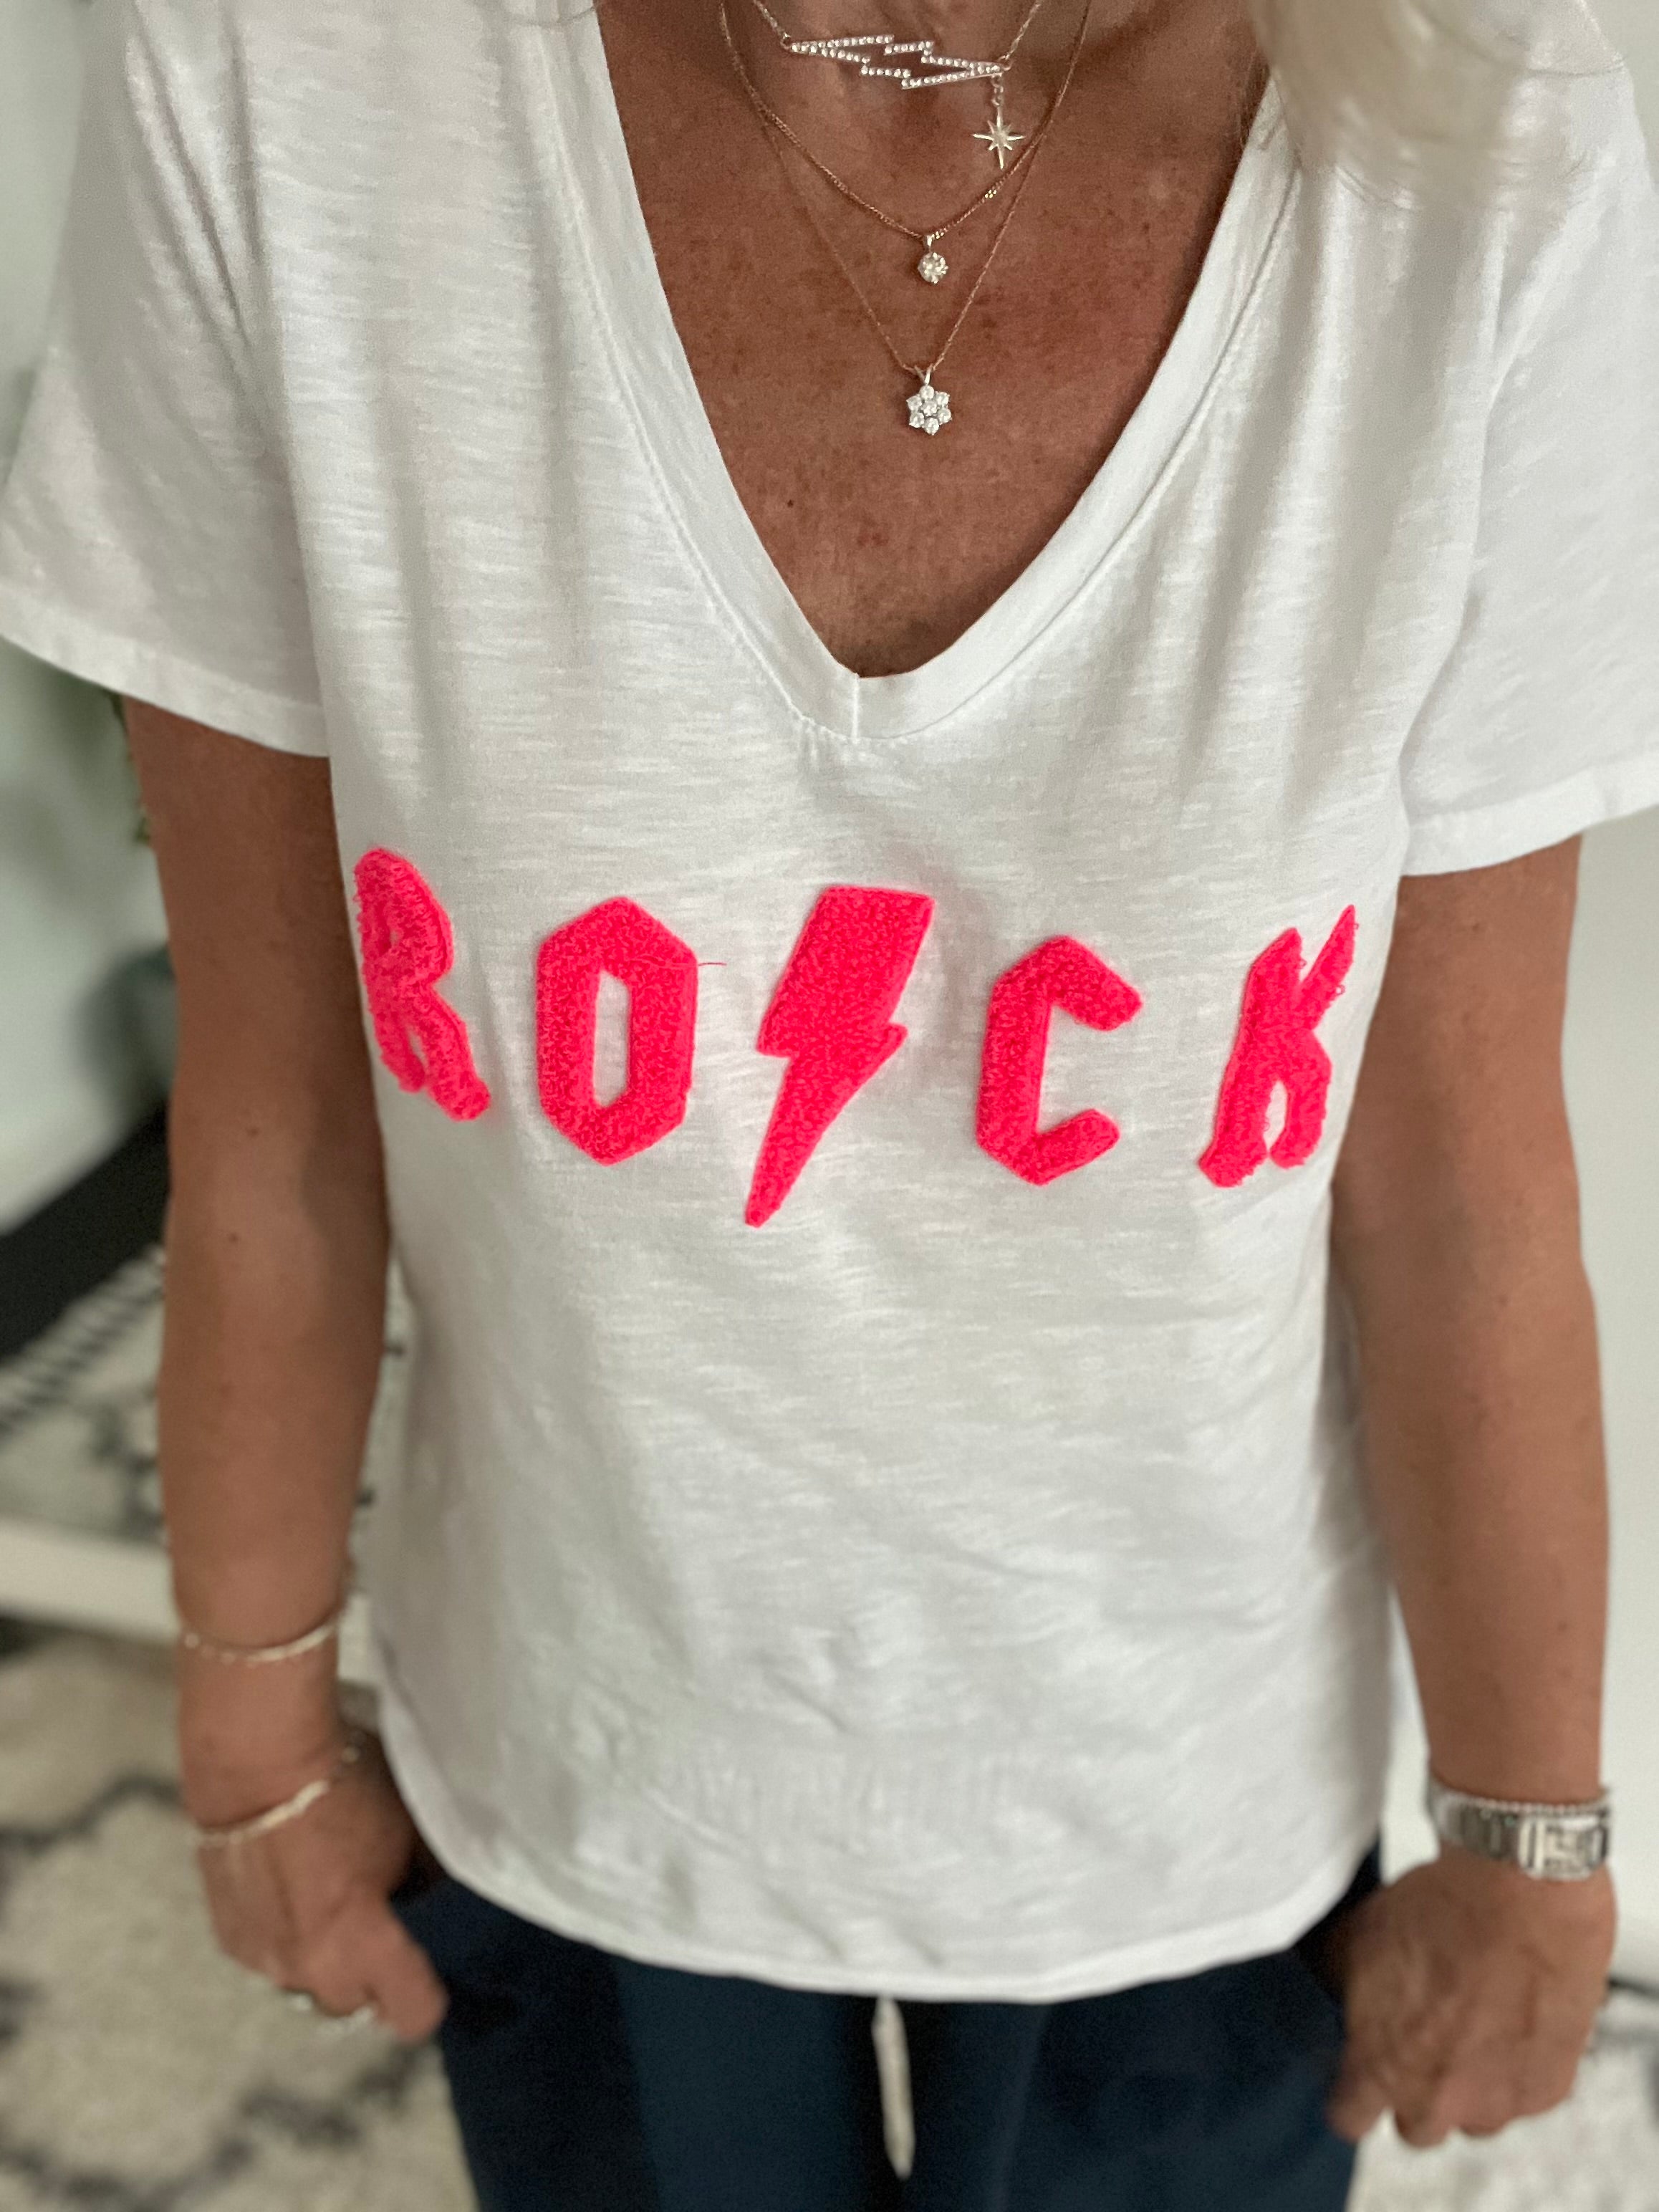 Rock Tee in White & Pink